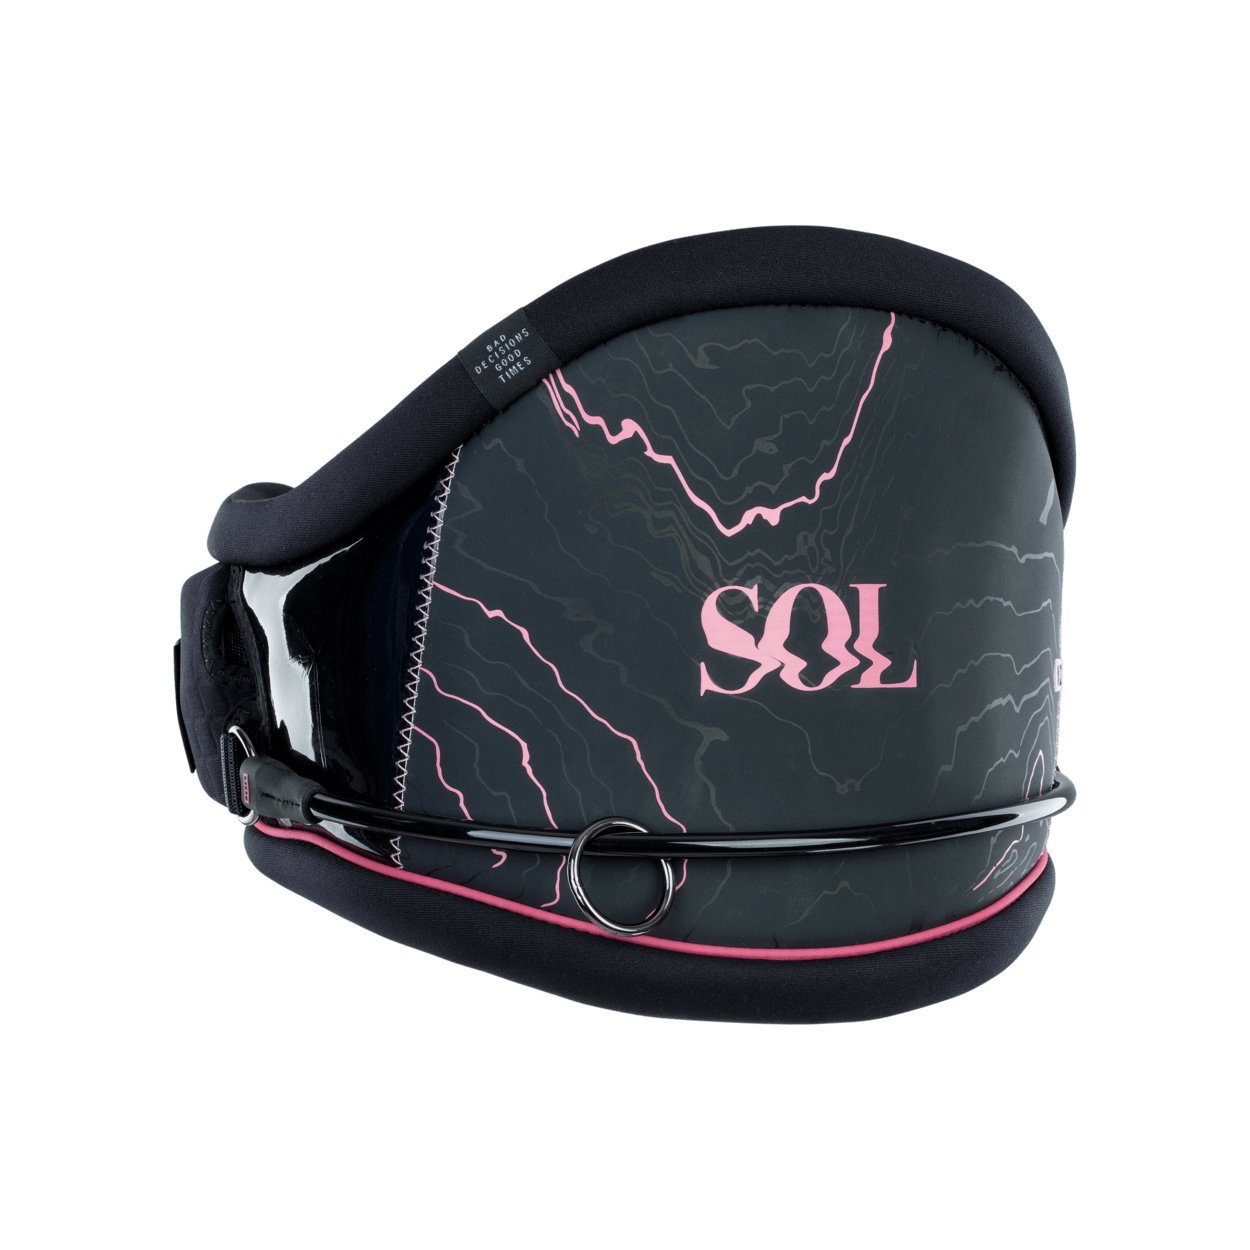 ION Sol 7 2021 - Worthing Watersports - 9008415944507 - Harness - ION Water